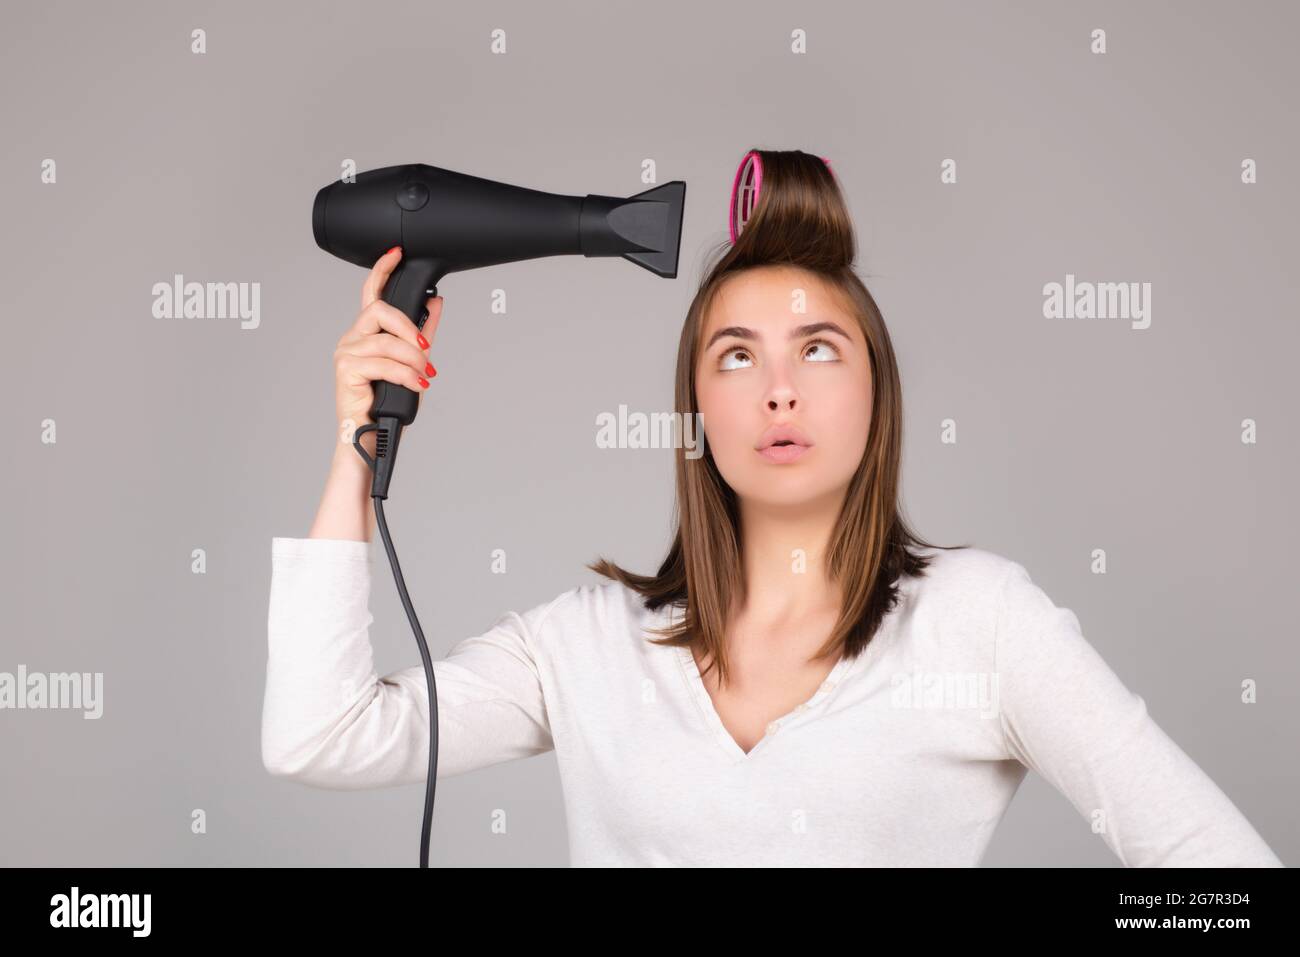 Woman with hair dryer. Funny girl with straight hair drying hair with professional hairdryer. Hairstyle, hairdressing concept. Stock Photo